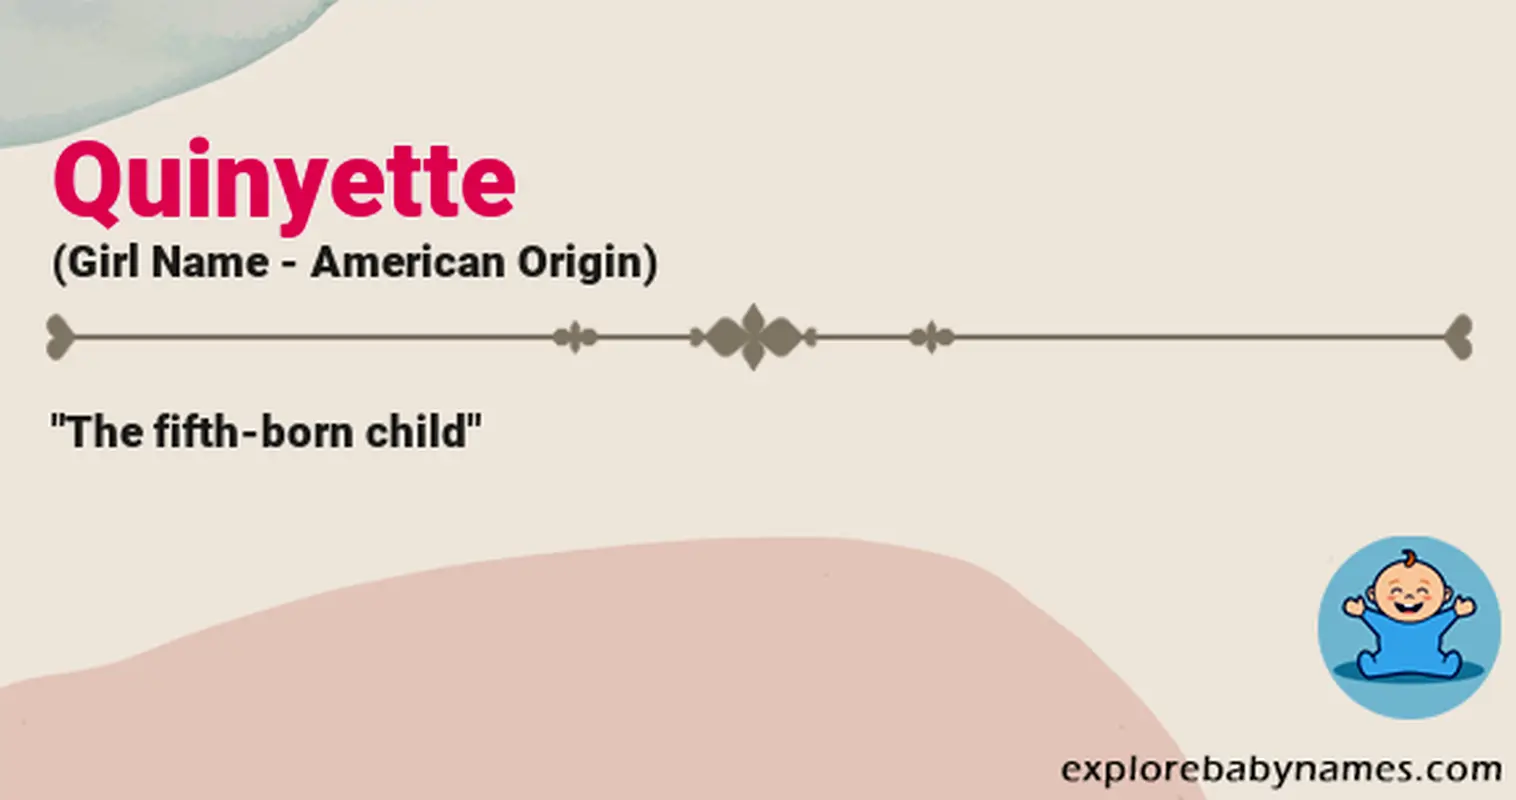 Meaning of Quinyette